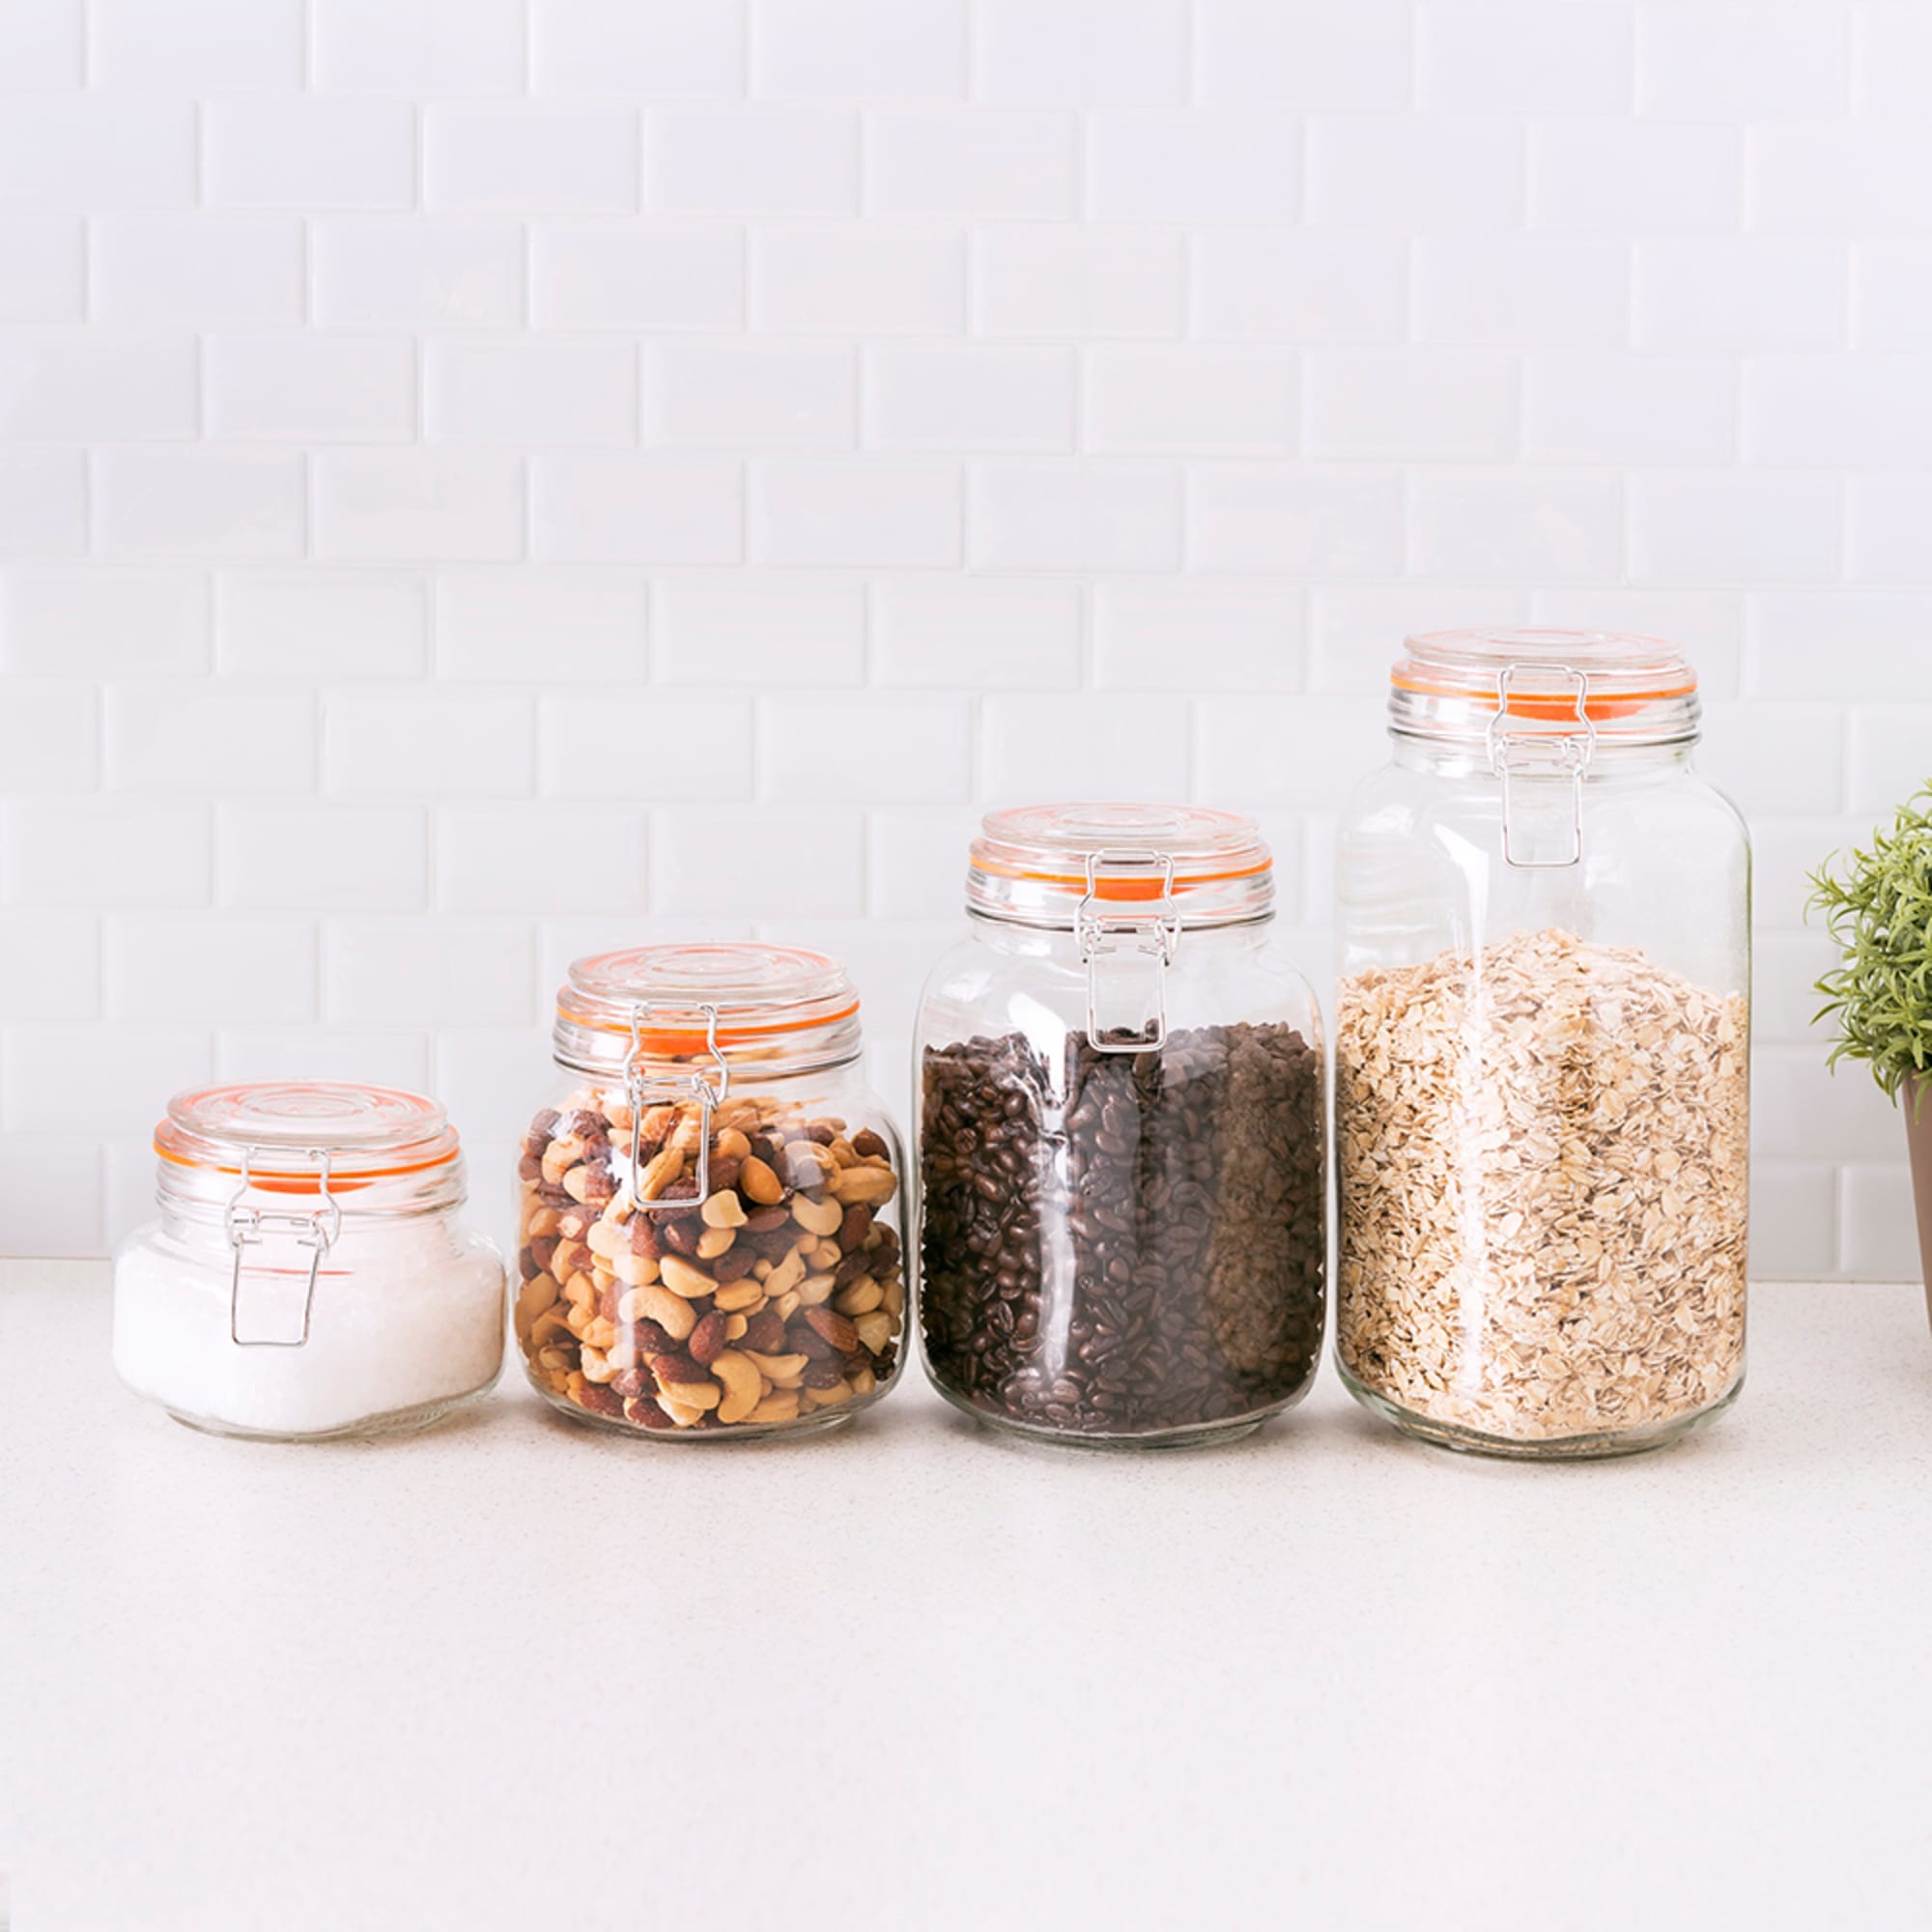 Home Basics 4 Piece Glass Canister Set, Clear $15.00 EACH, CASE PACK OF 6